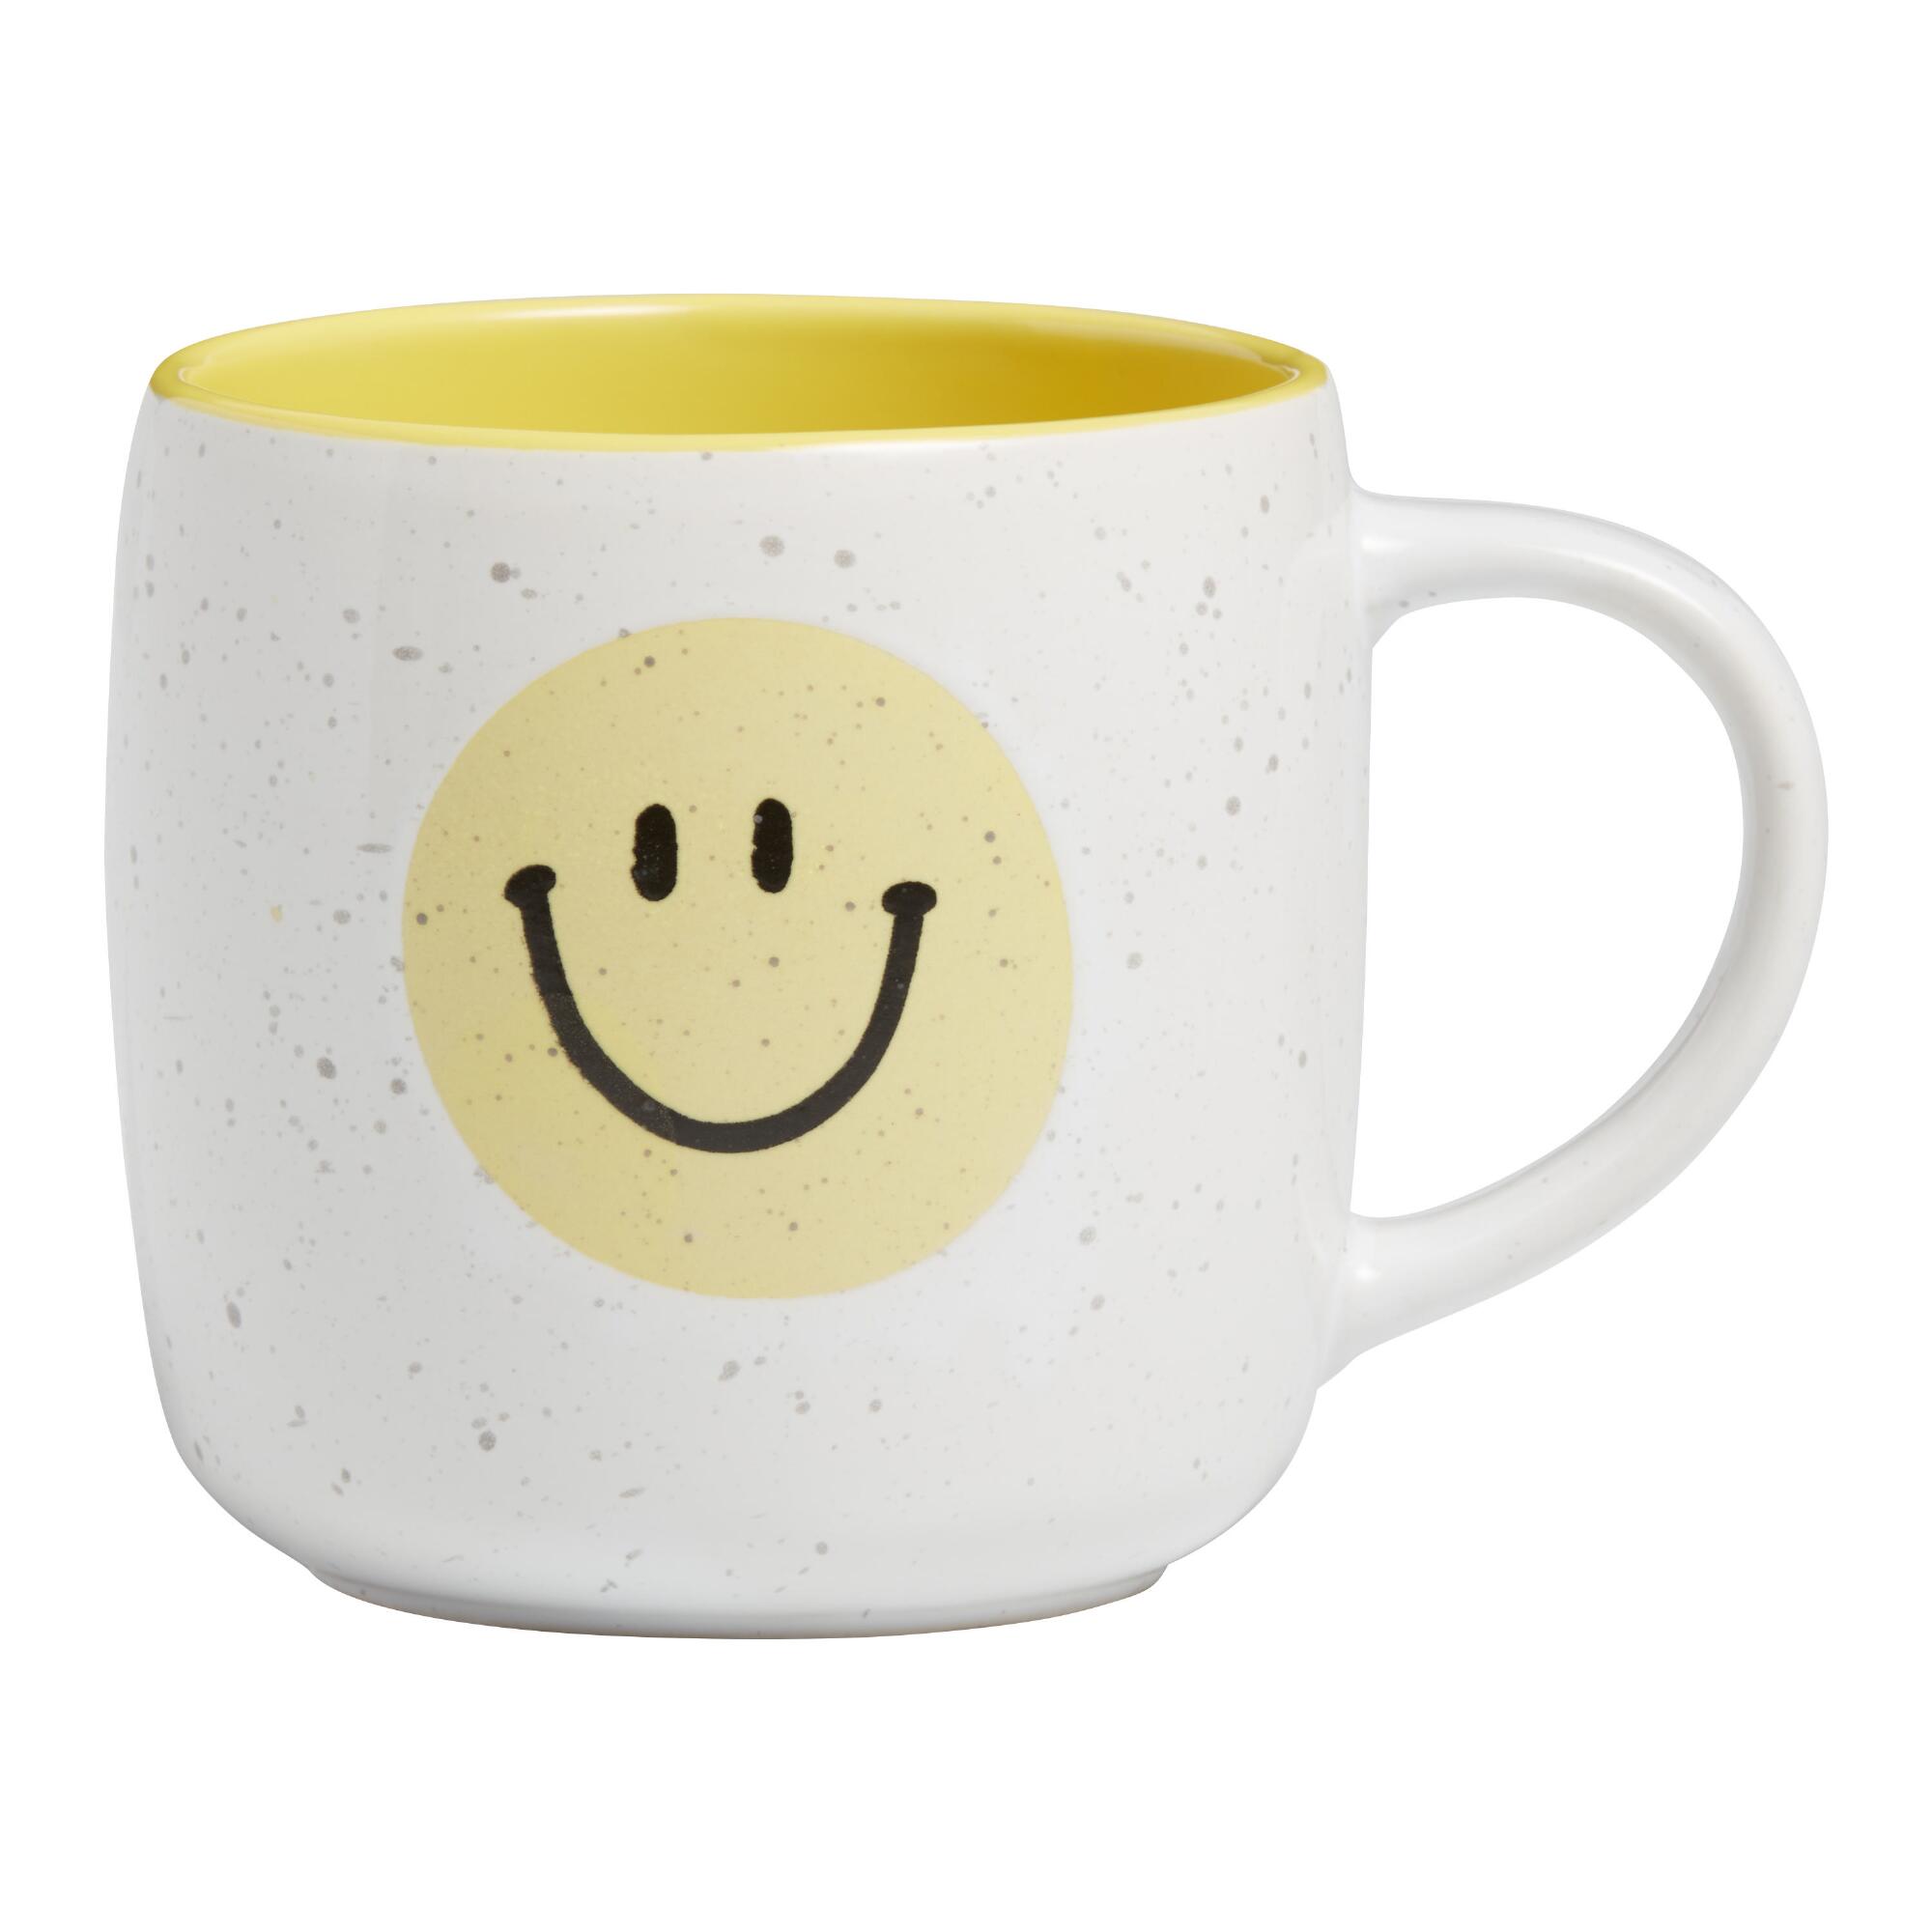 White and Yellow Speckled Smiley Face Mug - Stoneware by World Market